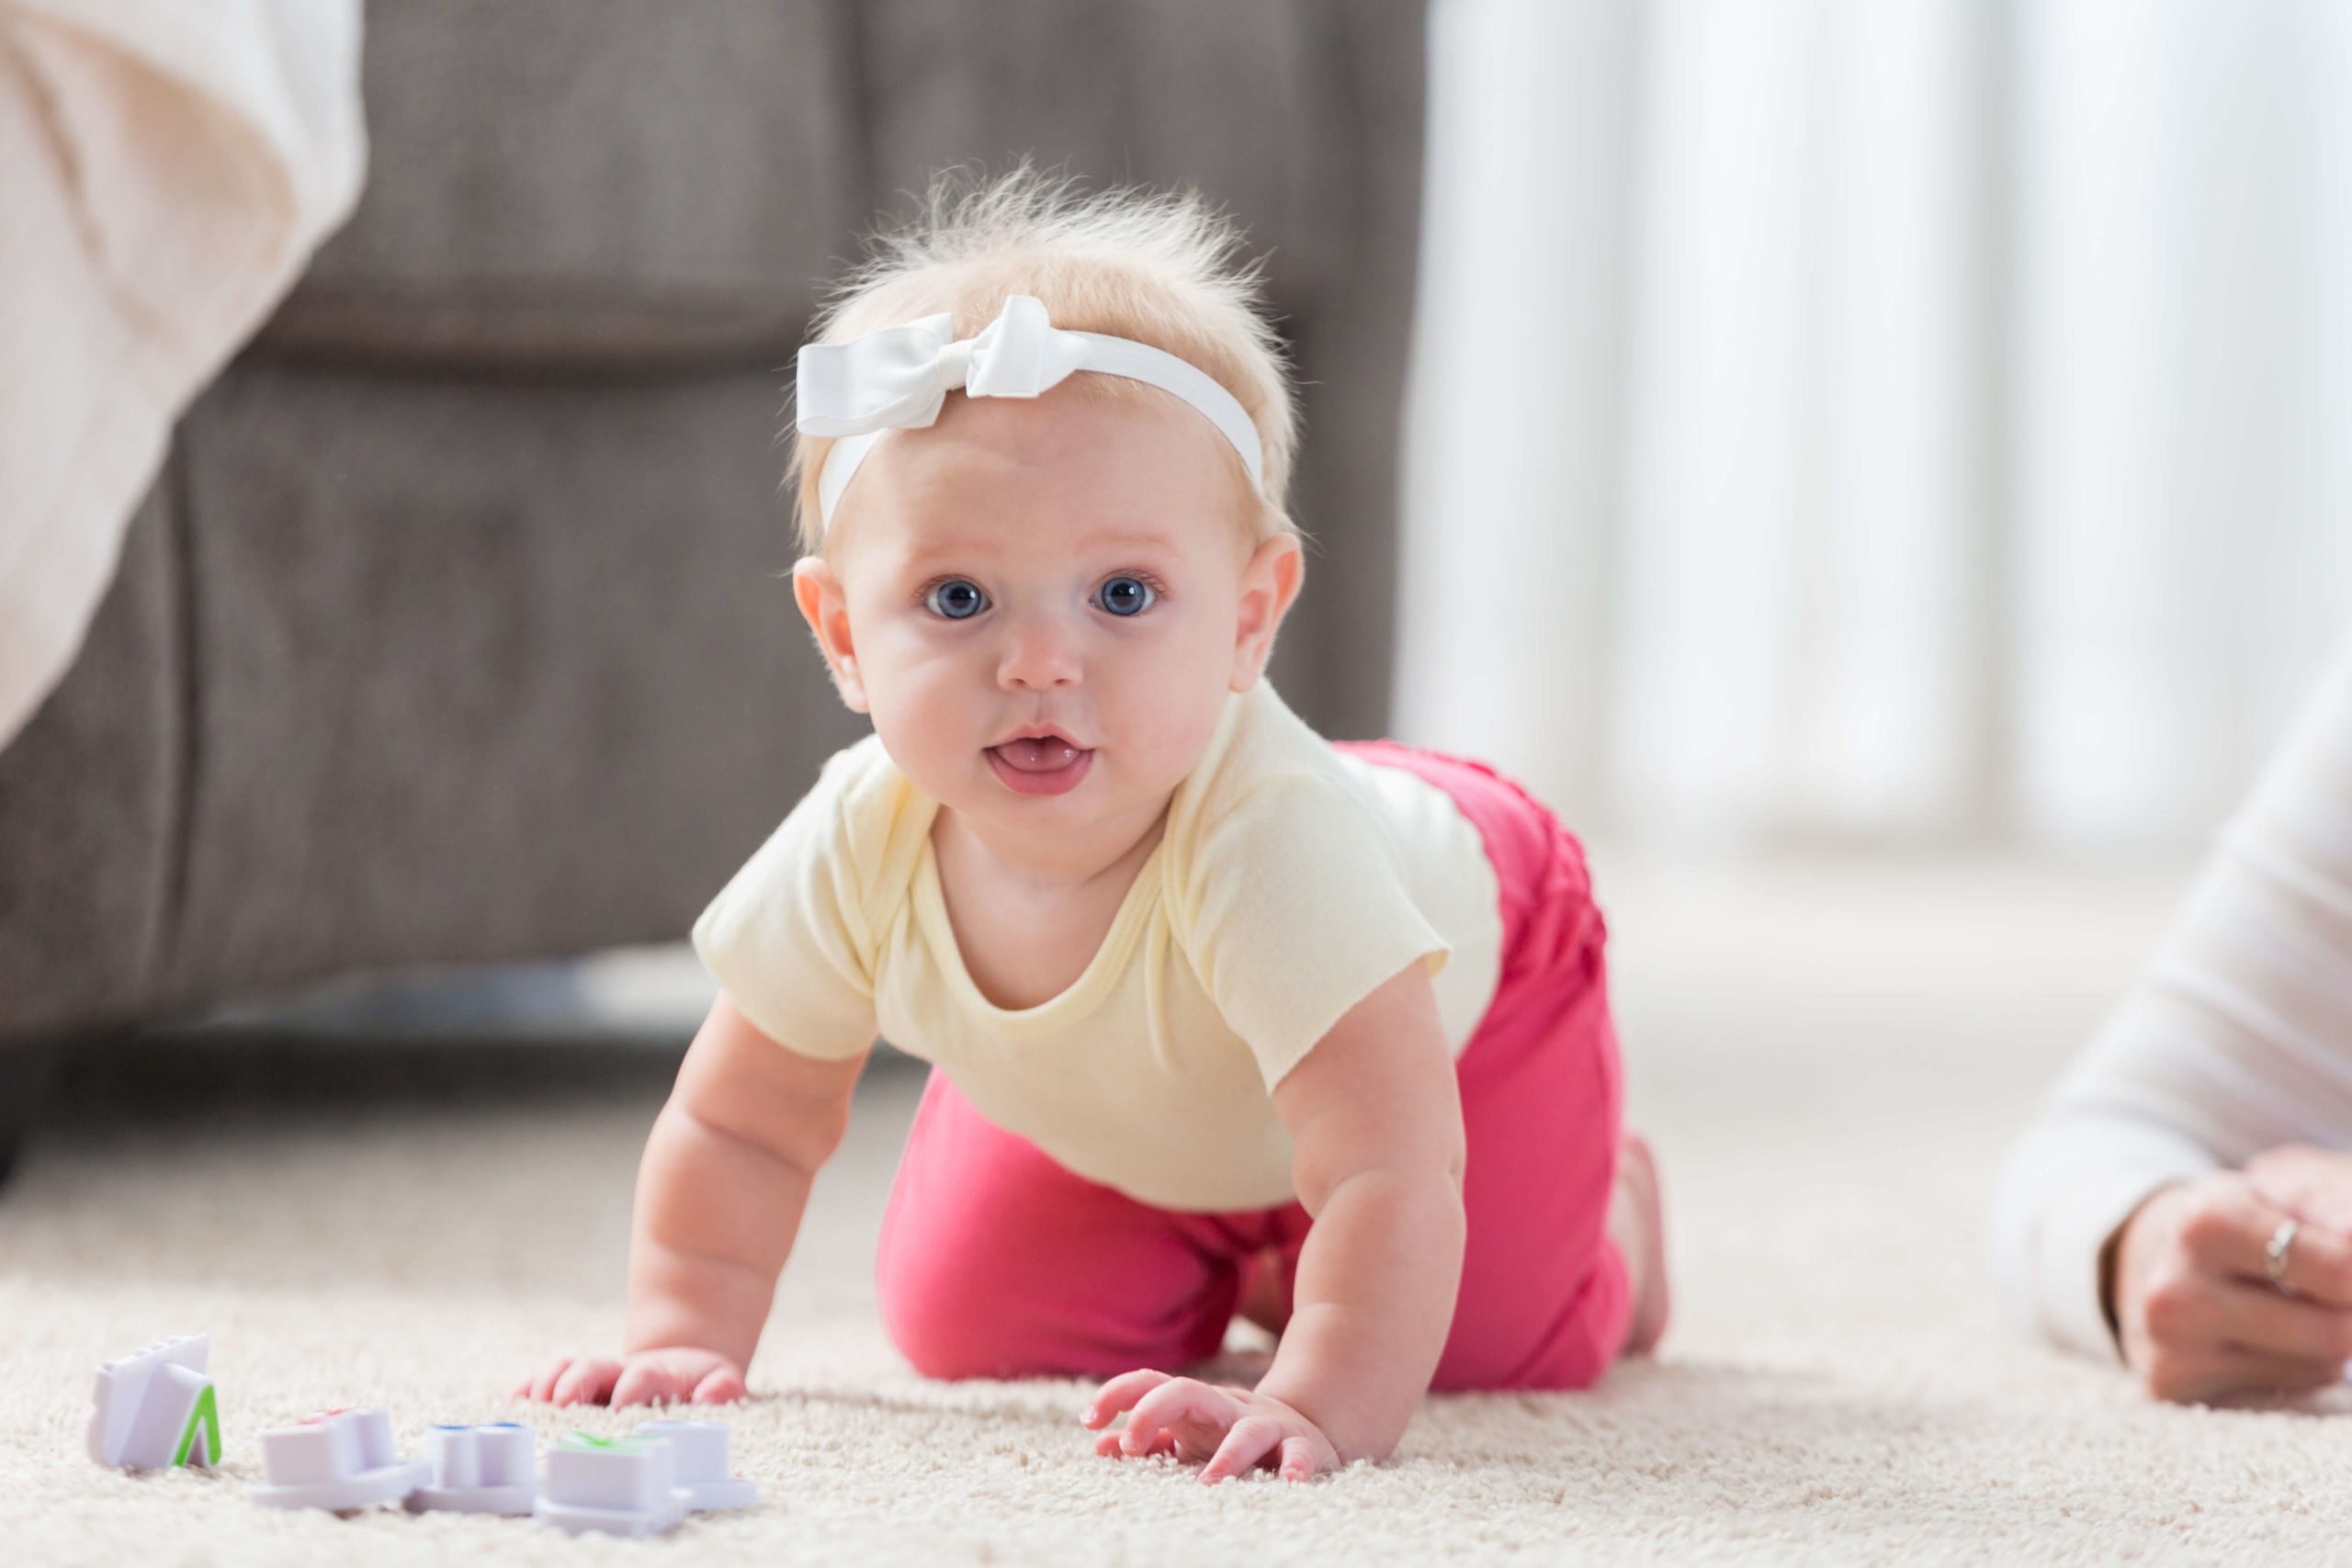 Why is crawling a gross motor skill?